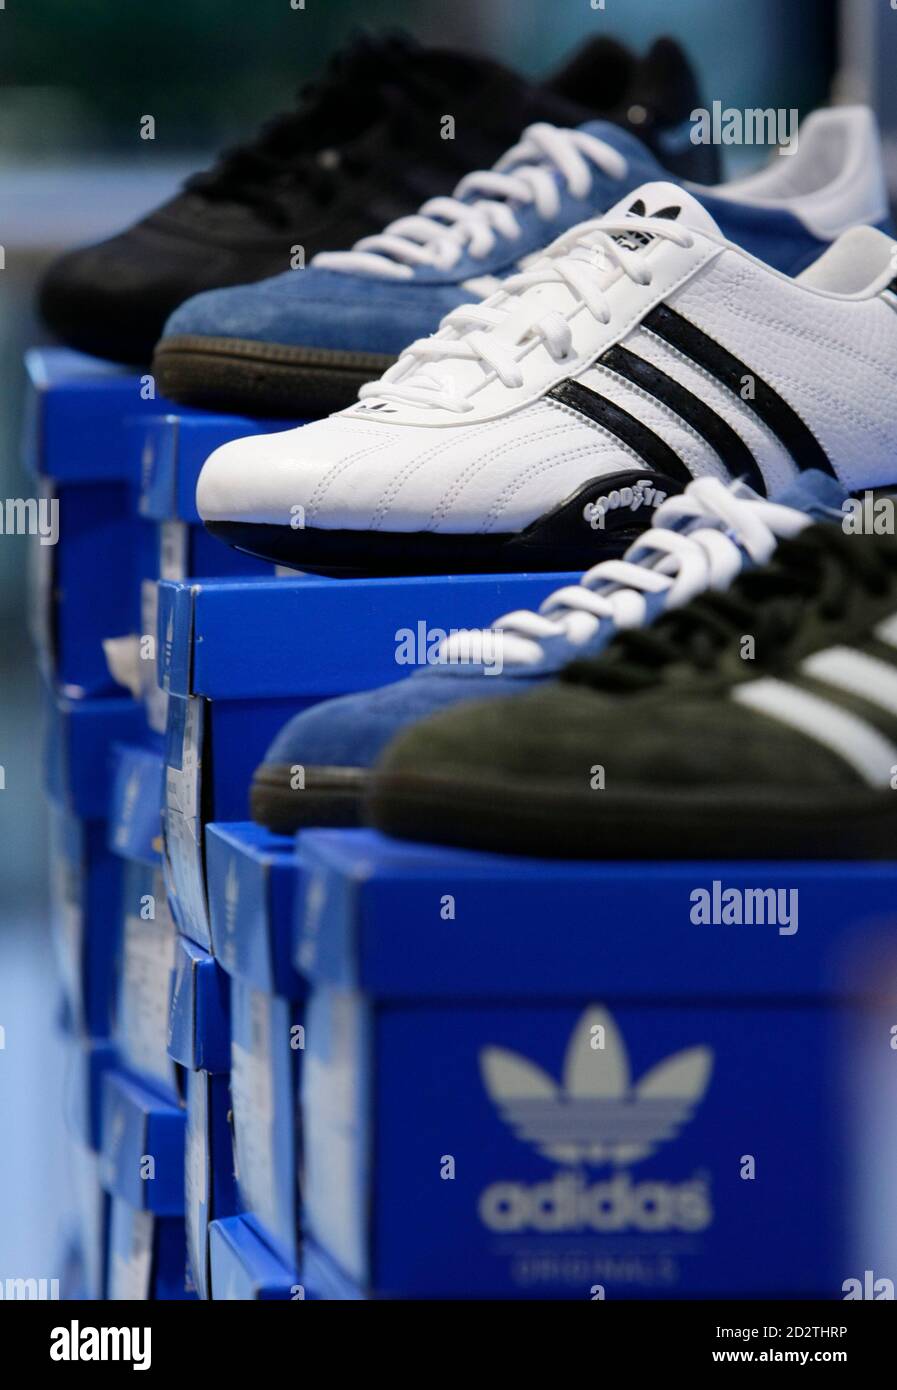 Shoes of Adidas fashion line are pictured in a shoe shop March 3, 2010. Adidas, the world's number two sports goods maker, expects to grow faster this year in North